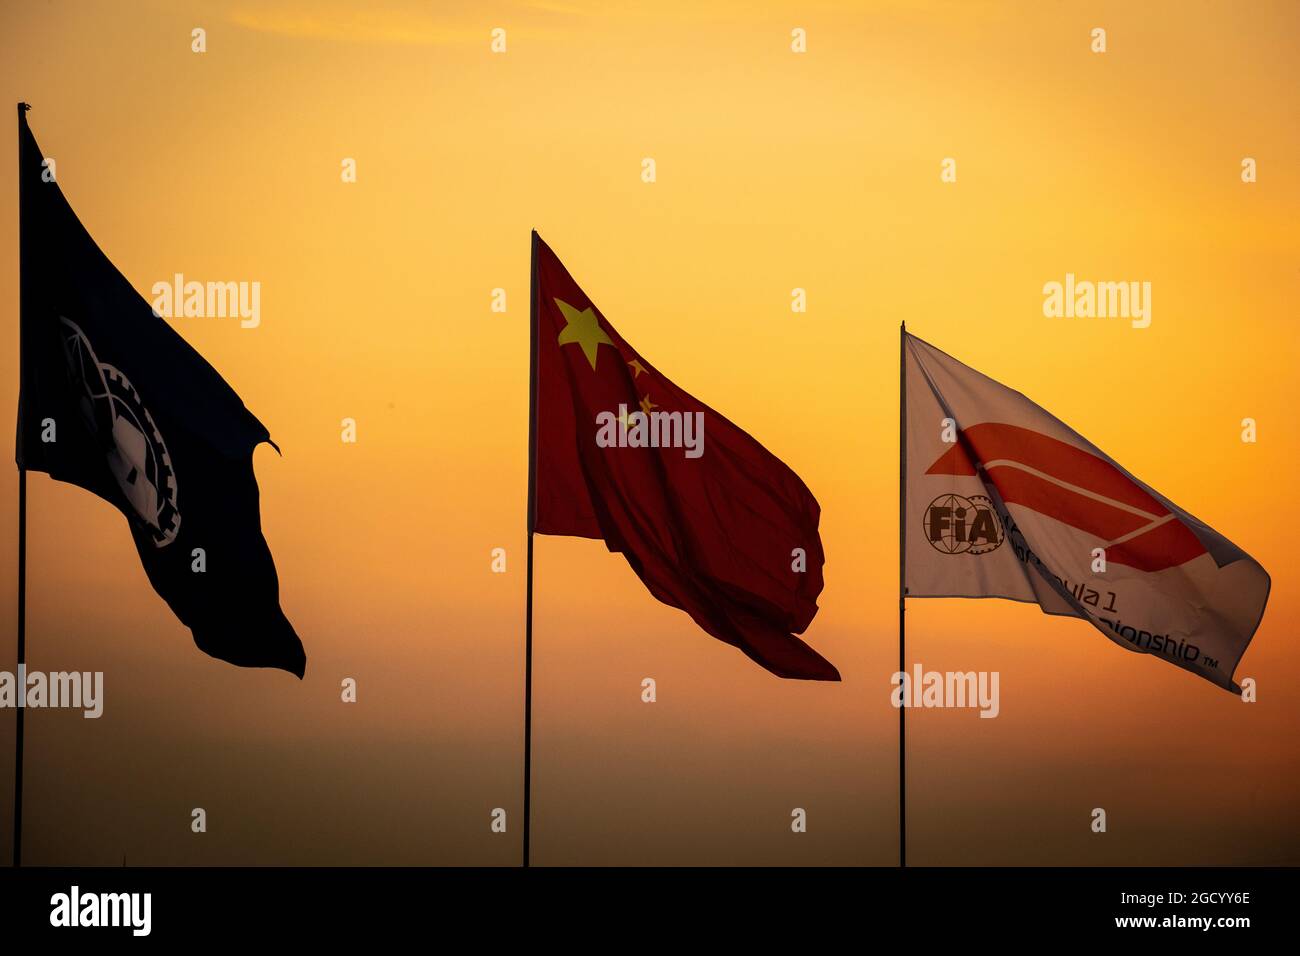 Atmosphere - flags at sunset. Chinese Grand Prix, Thursday 11th April 2019. Shanghai, China. Stock Photo